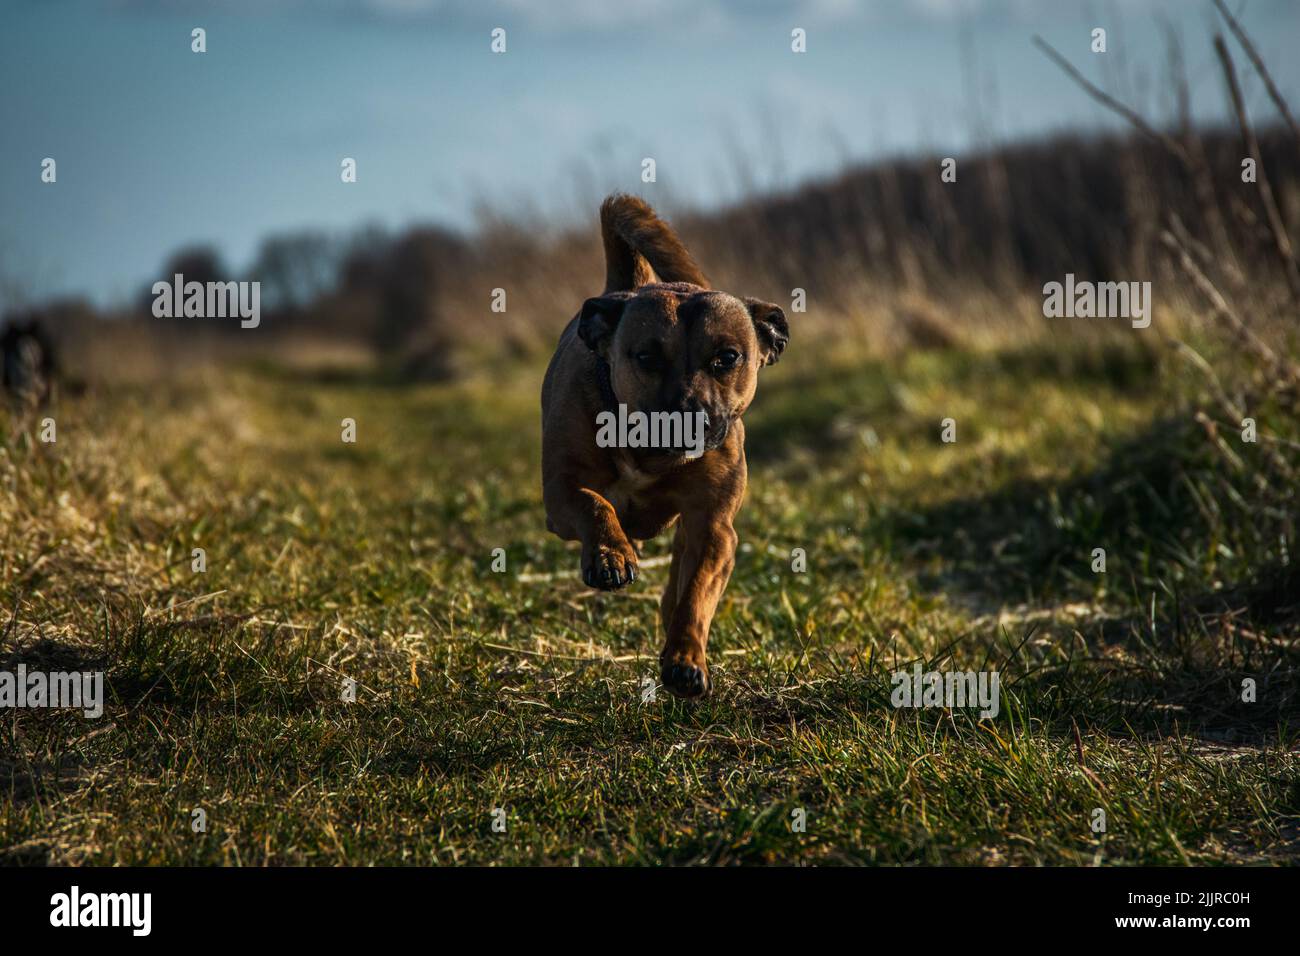 A close-up of a cute Staffordshire bull terrier running across a field under the evening rays of the sun Stock Photo